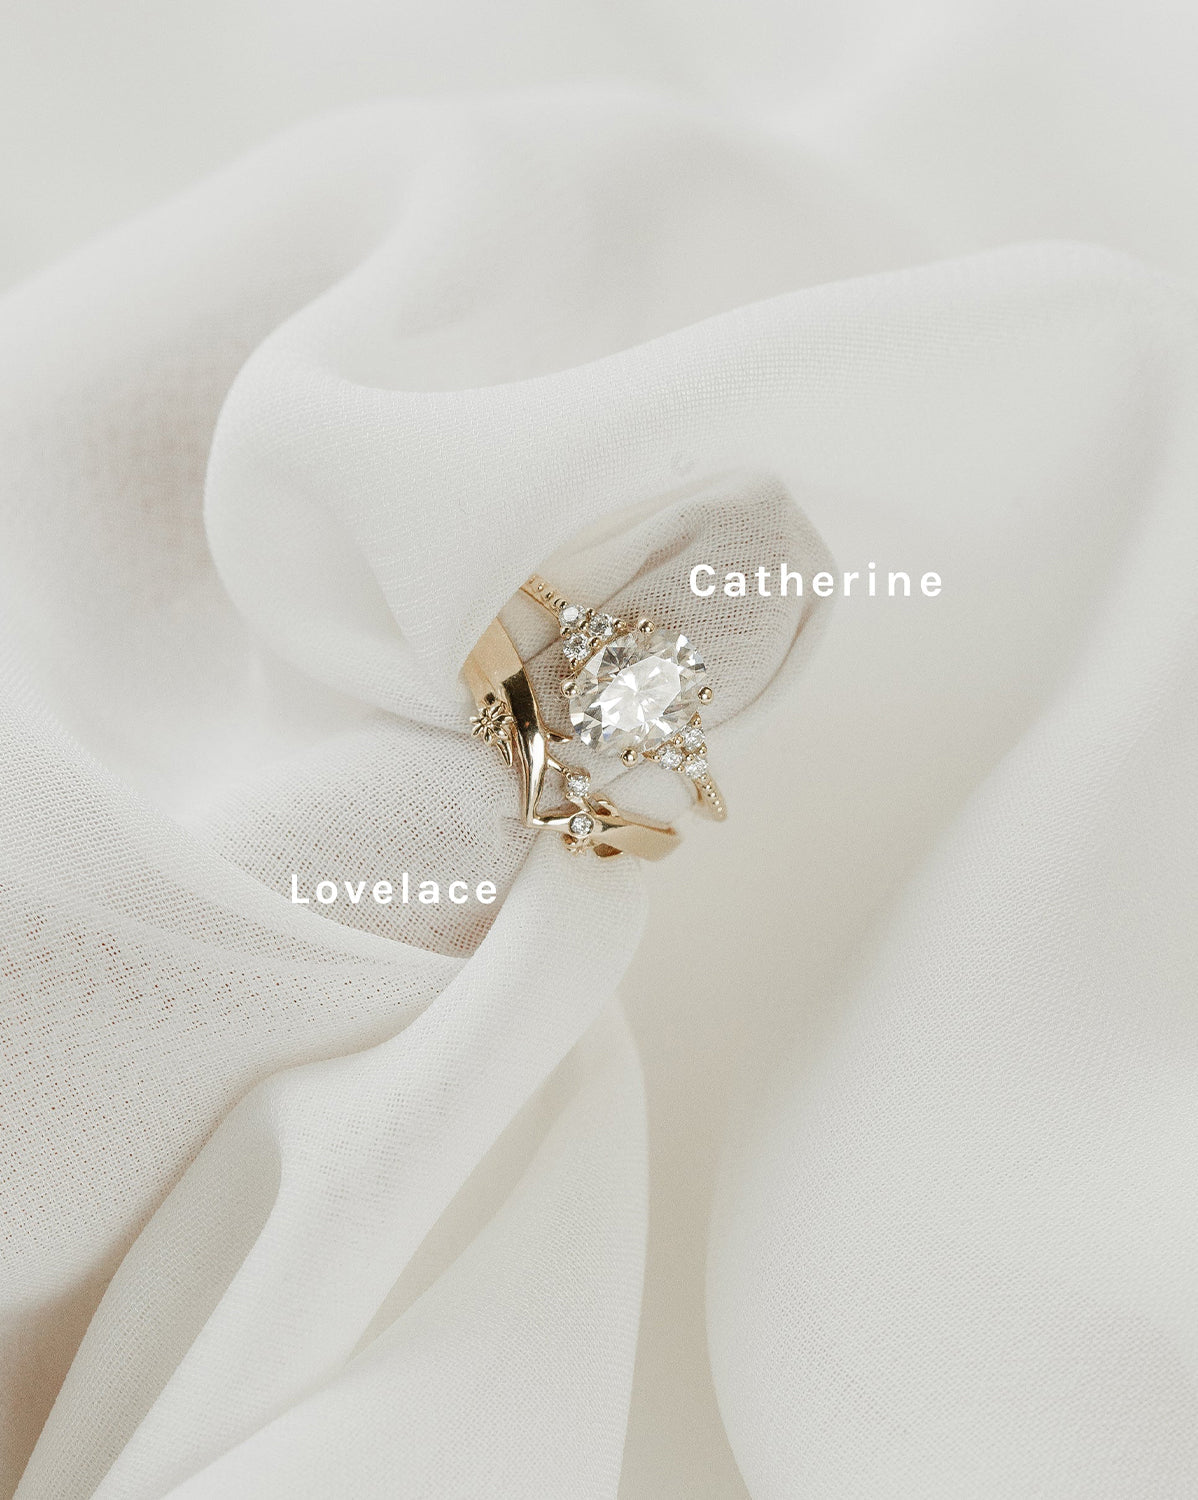 White Gold Catherine Oval Ring